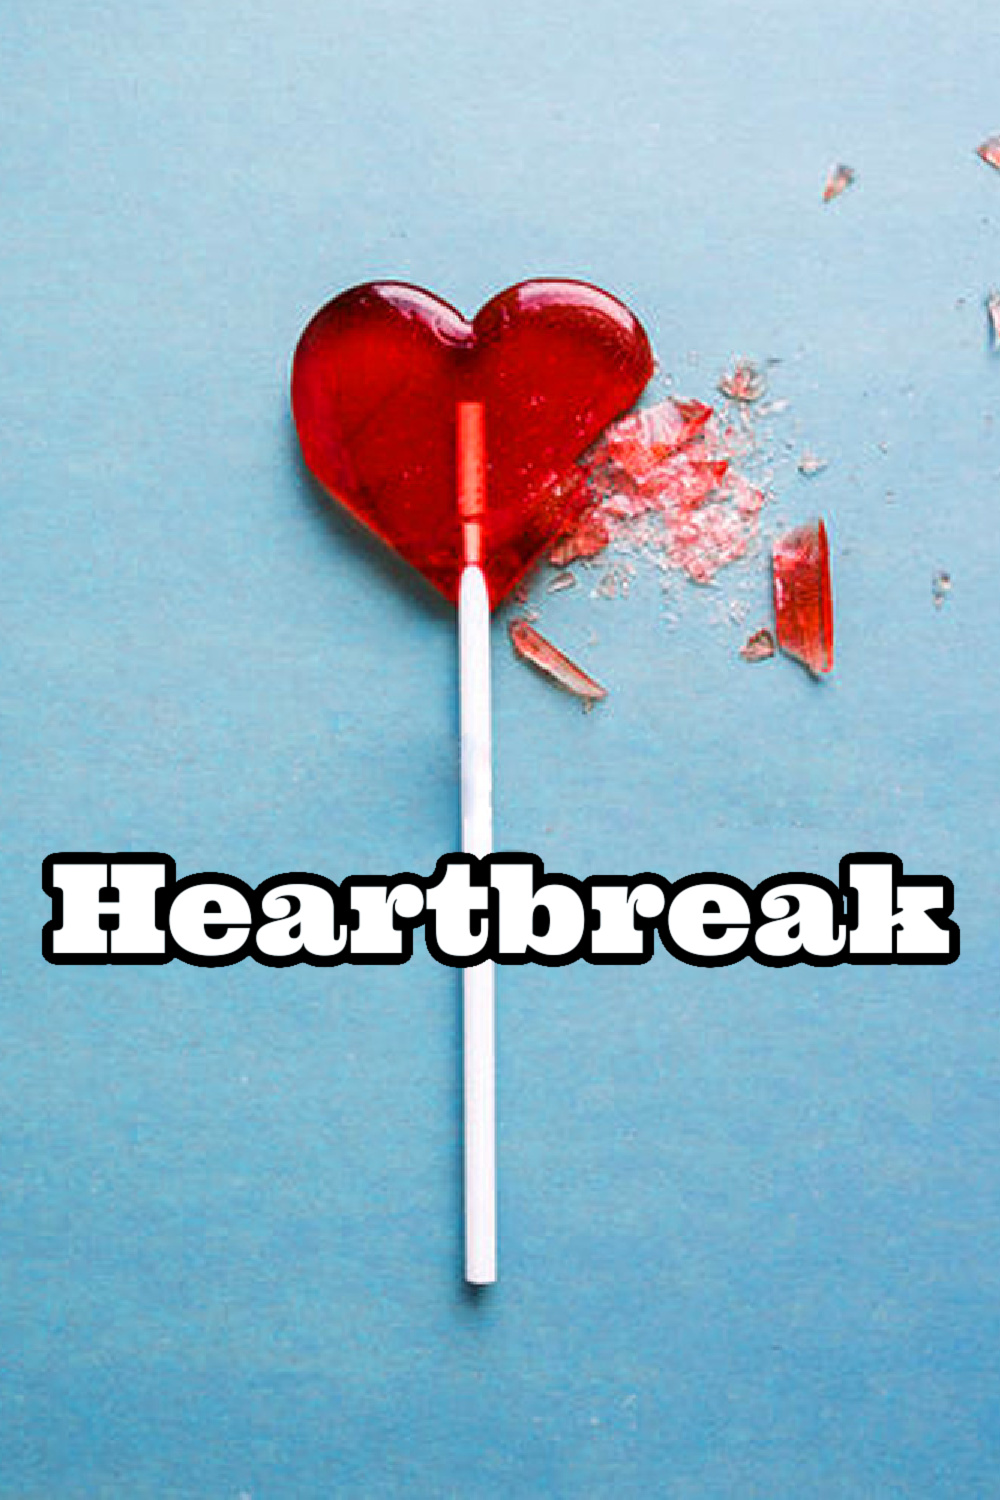 do breakups hurt women more than men, getting closure after a breakup, getting closure in a relationship, can you be friends with your ex, getting closure without closure, getting closure from your ex, masculine vs feminine breakup, masculine energy dating, feminine energy dating, feminine energy in relationships, understanding masculine and feminine energy, feminine and masculine energy in relationships, Everyday starlet, sarah blodgett,